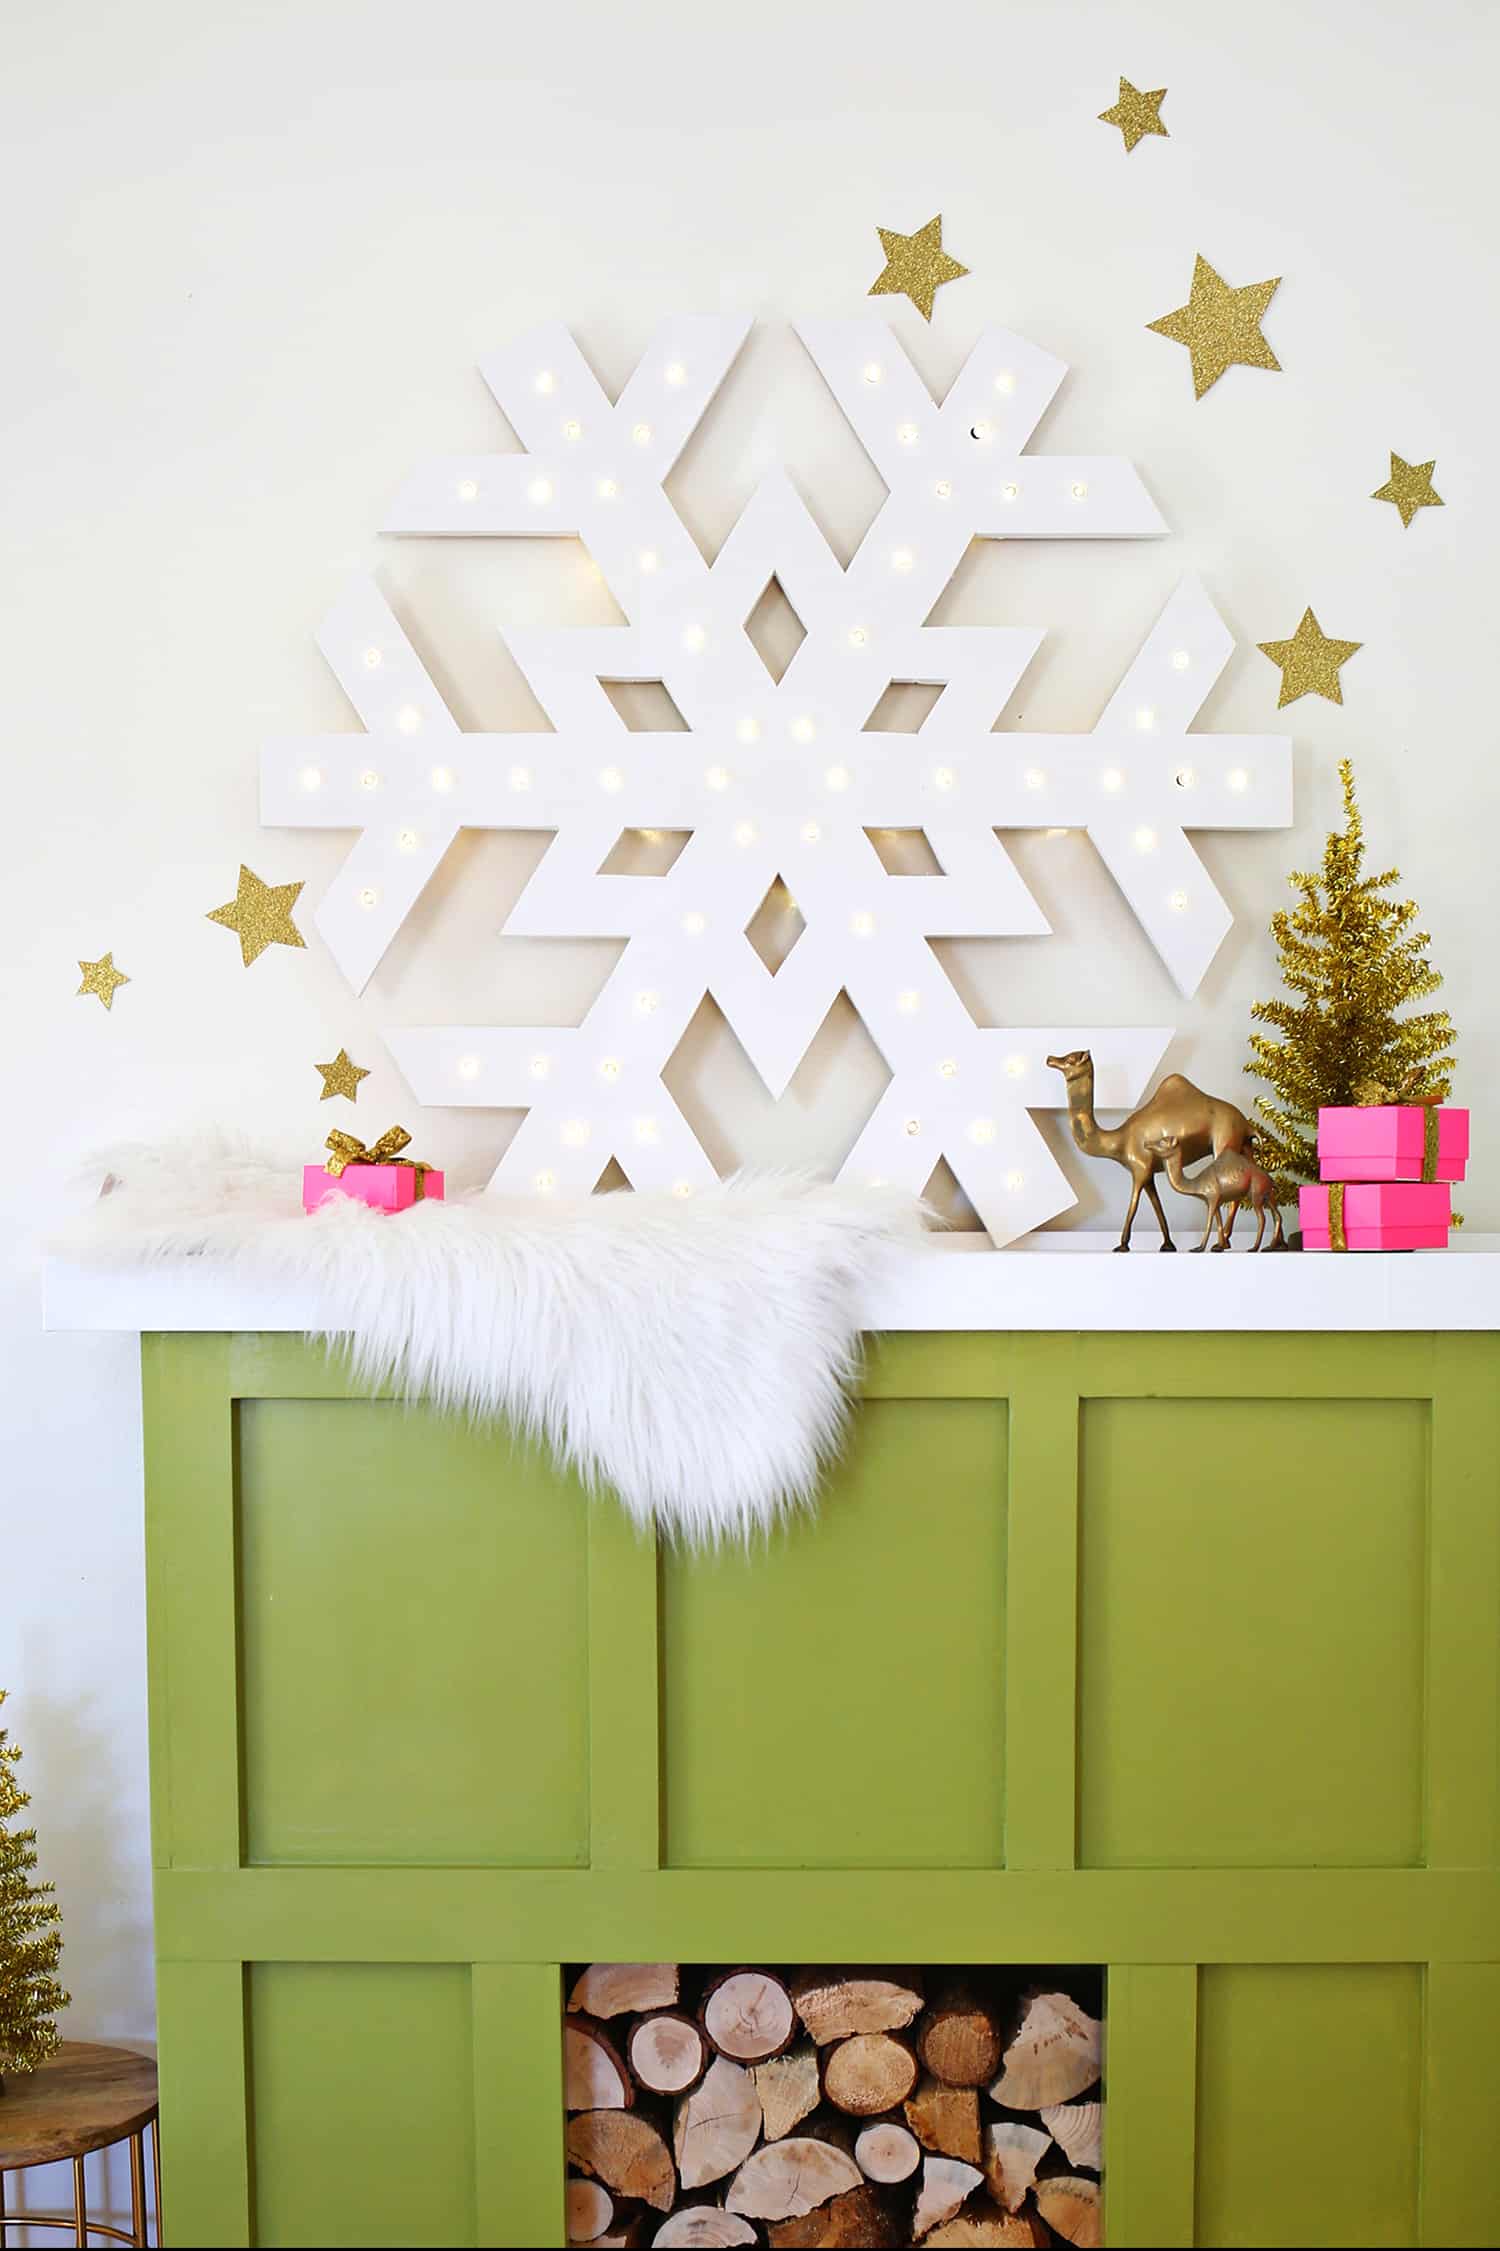 Snowflake marquee light